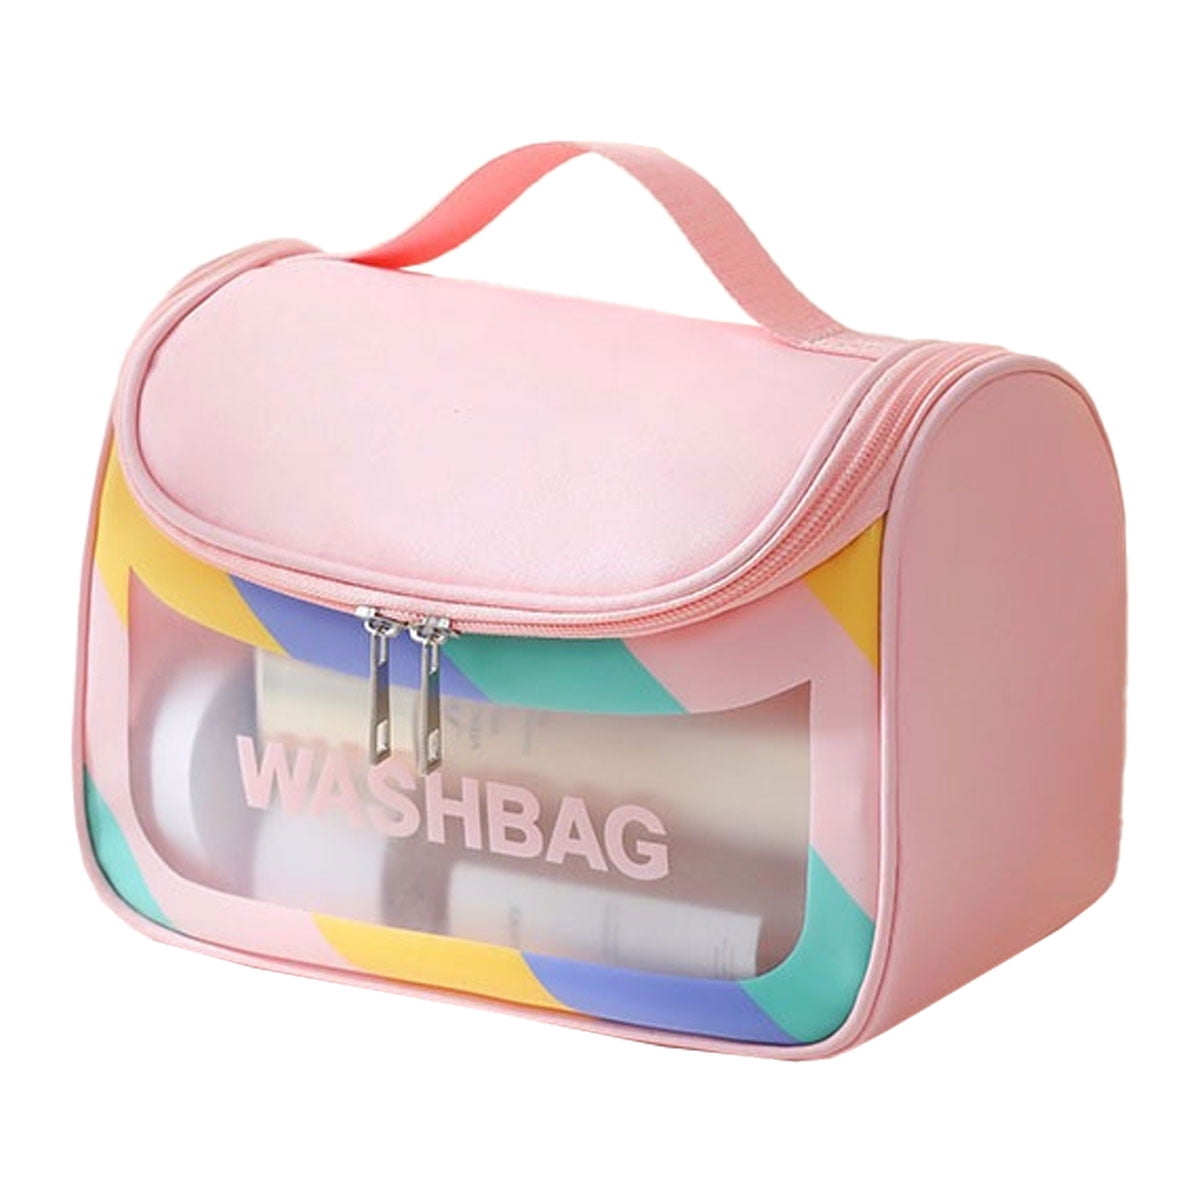 Clear Travel Packing Cube/See Through PU/PVC Pouch, Transparent  Multipurpose Bag - pink